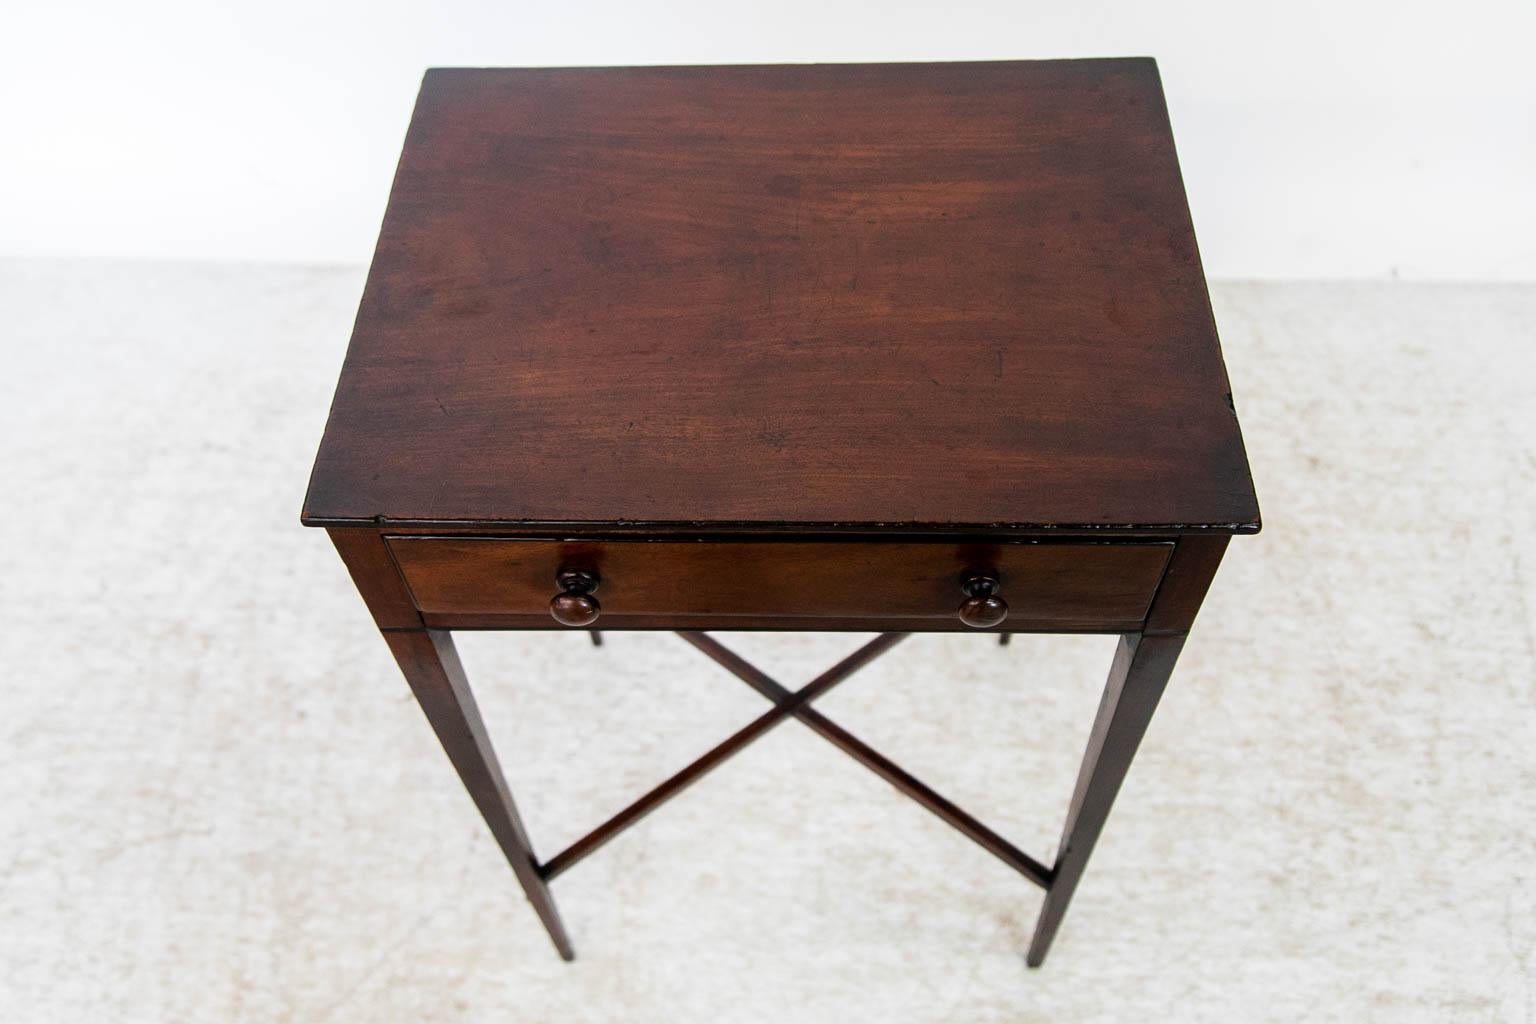 This Hepplewhite mahogany table is finished on all four sides and has an ebony band below the drawer which traverses all four sides. The drawer has the original dividers and ebony edging on the front. The legs are joined by an 